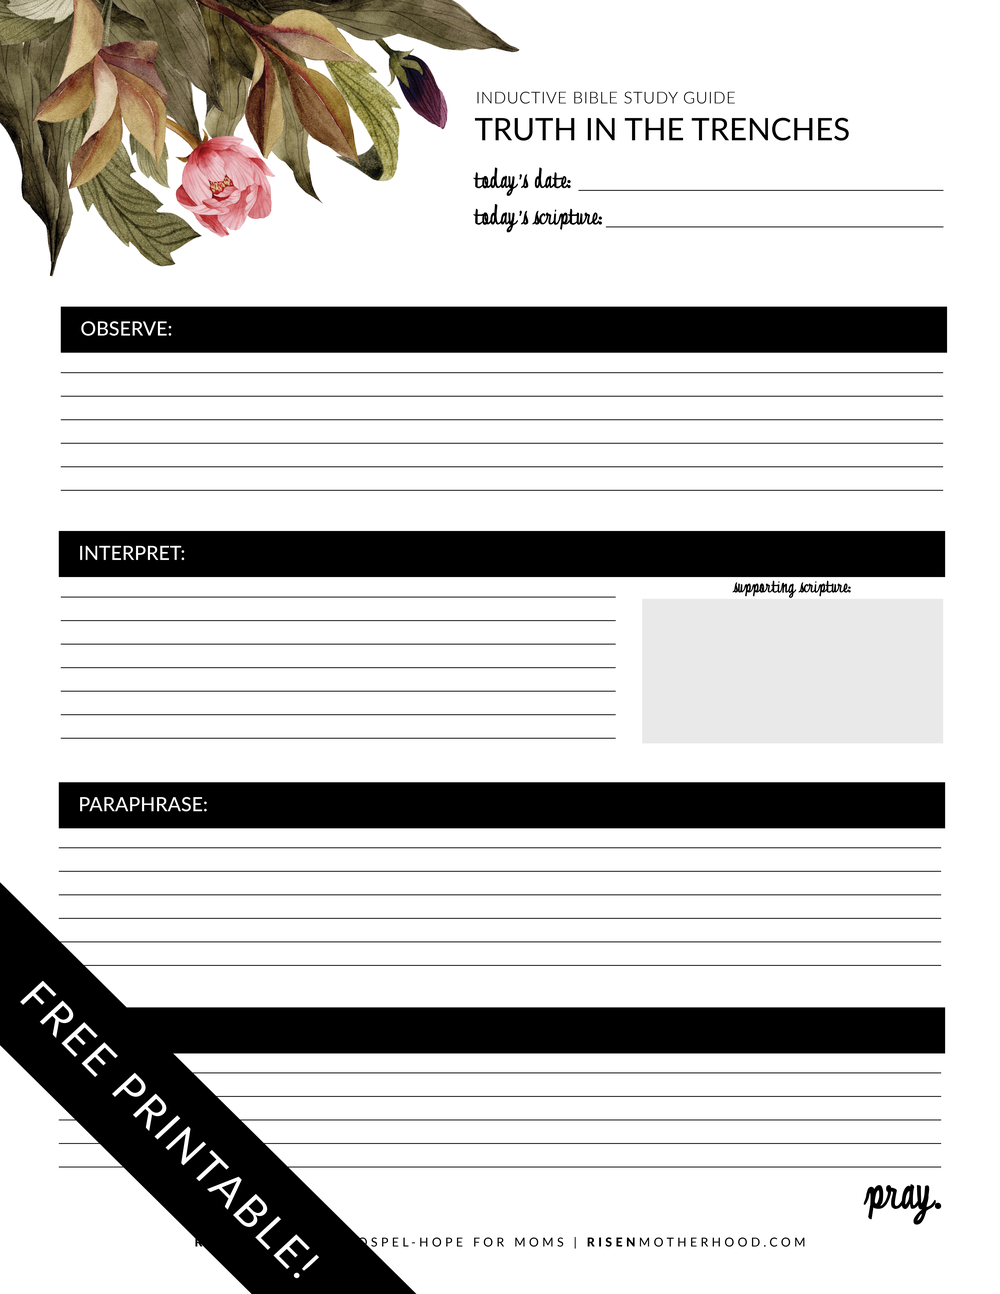 Free Printable Inductive Bible Study Worksheets Companion Card 